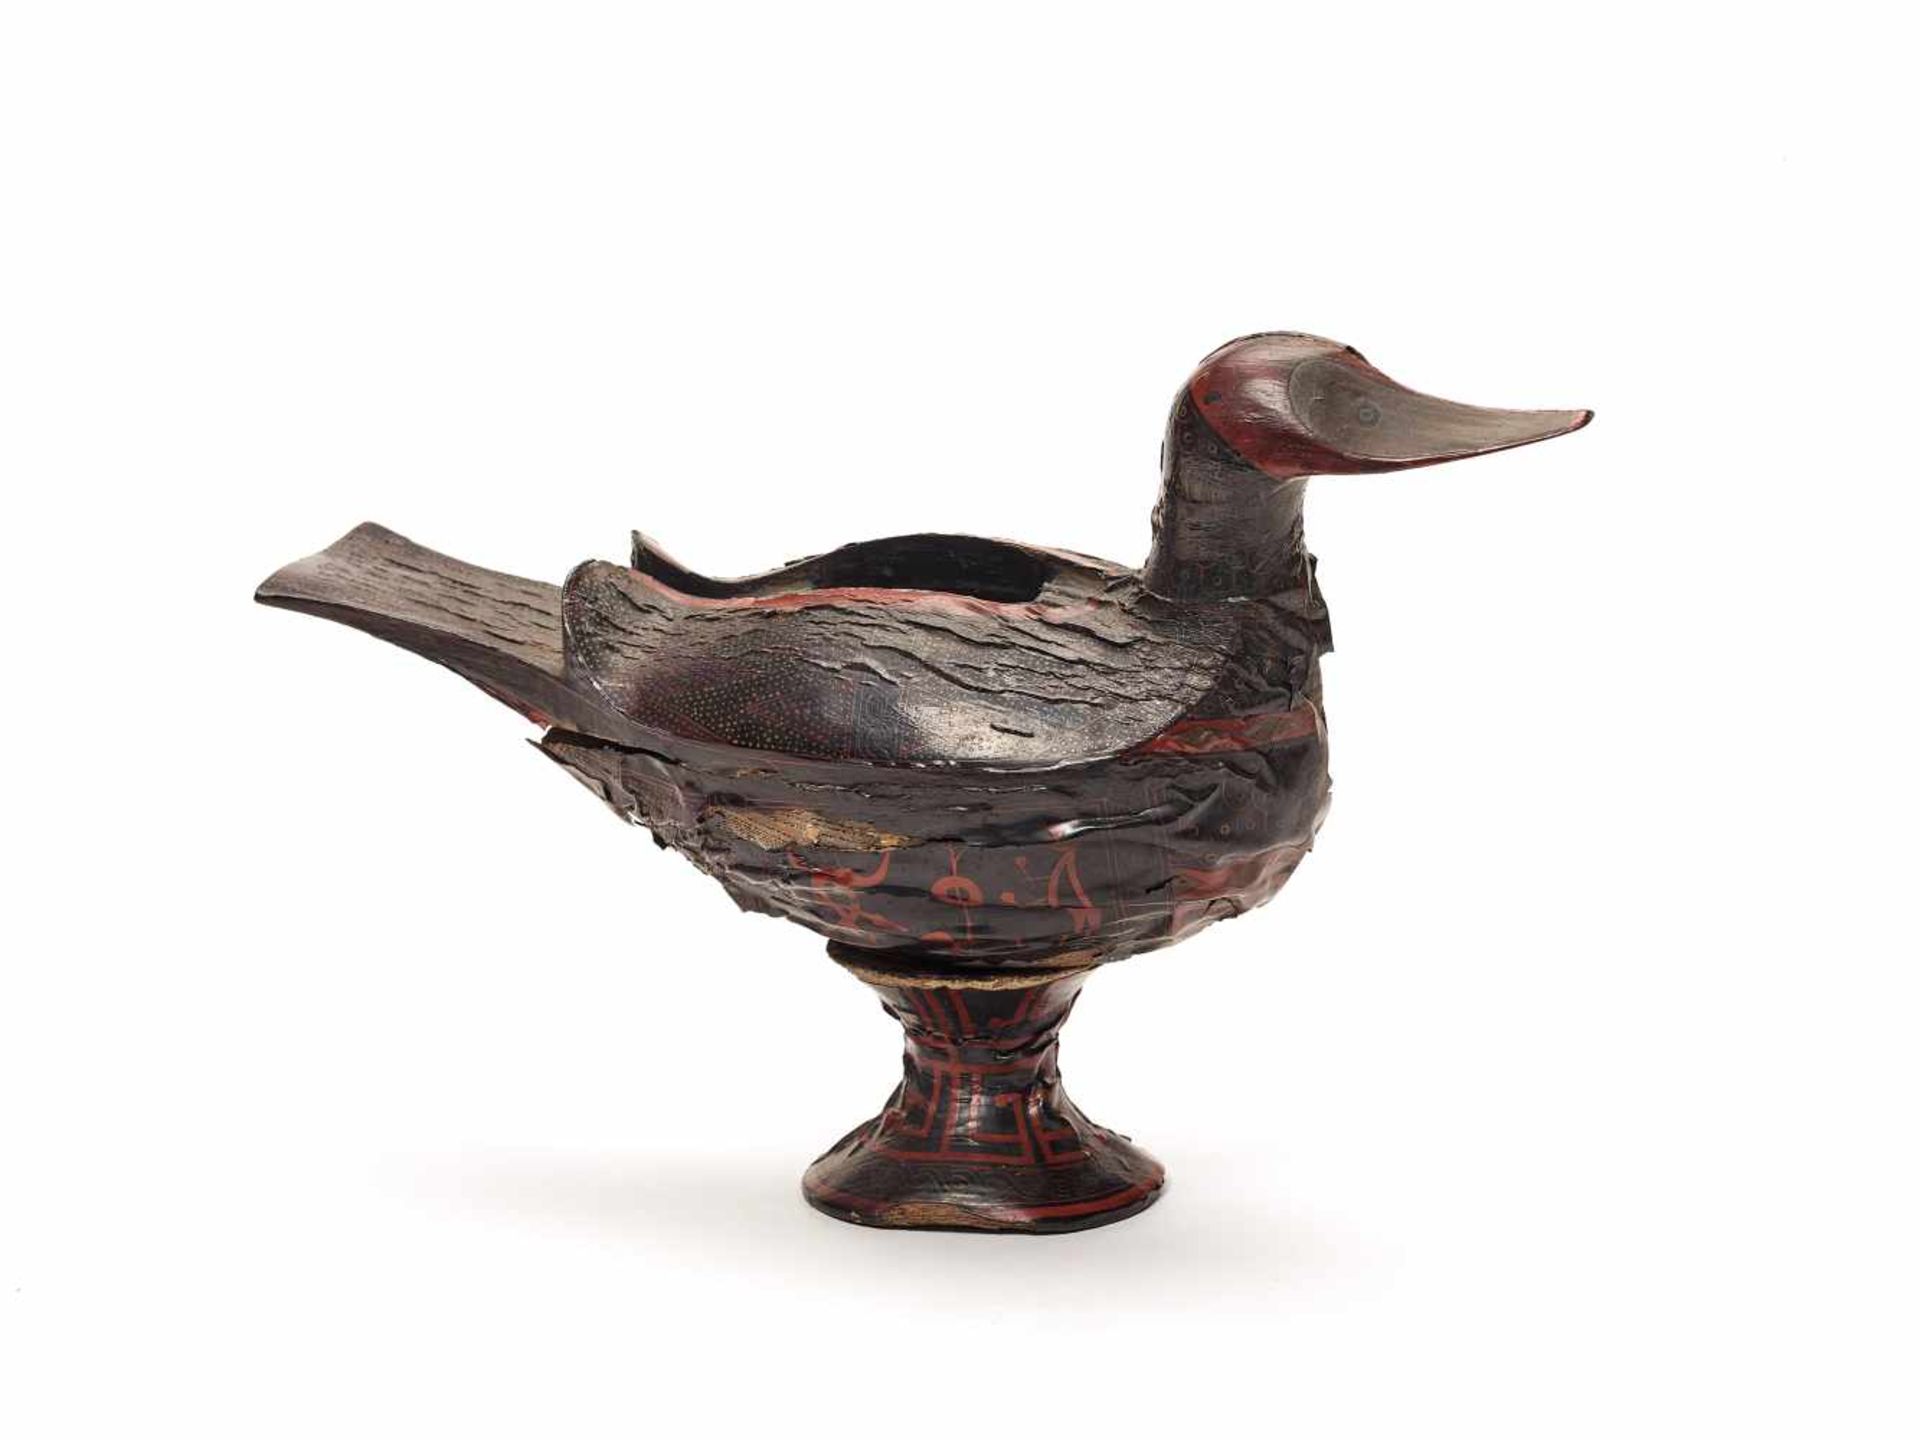 AN EXTREMELY RARE HAN DYNASTY LACQUER DUCK ON MATCHING STANDThe carved wooden bird with original